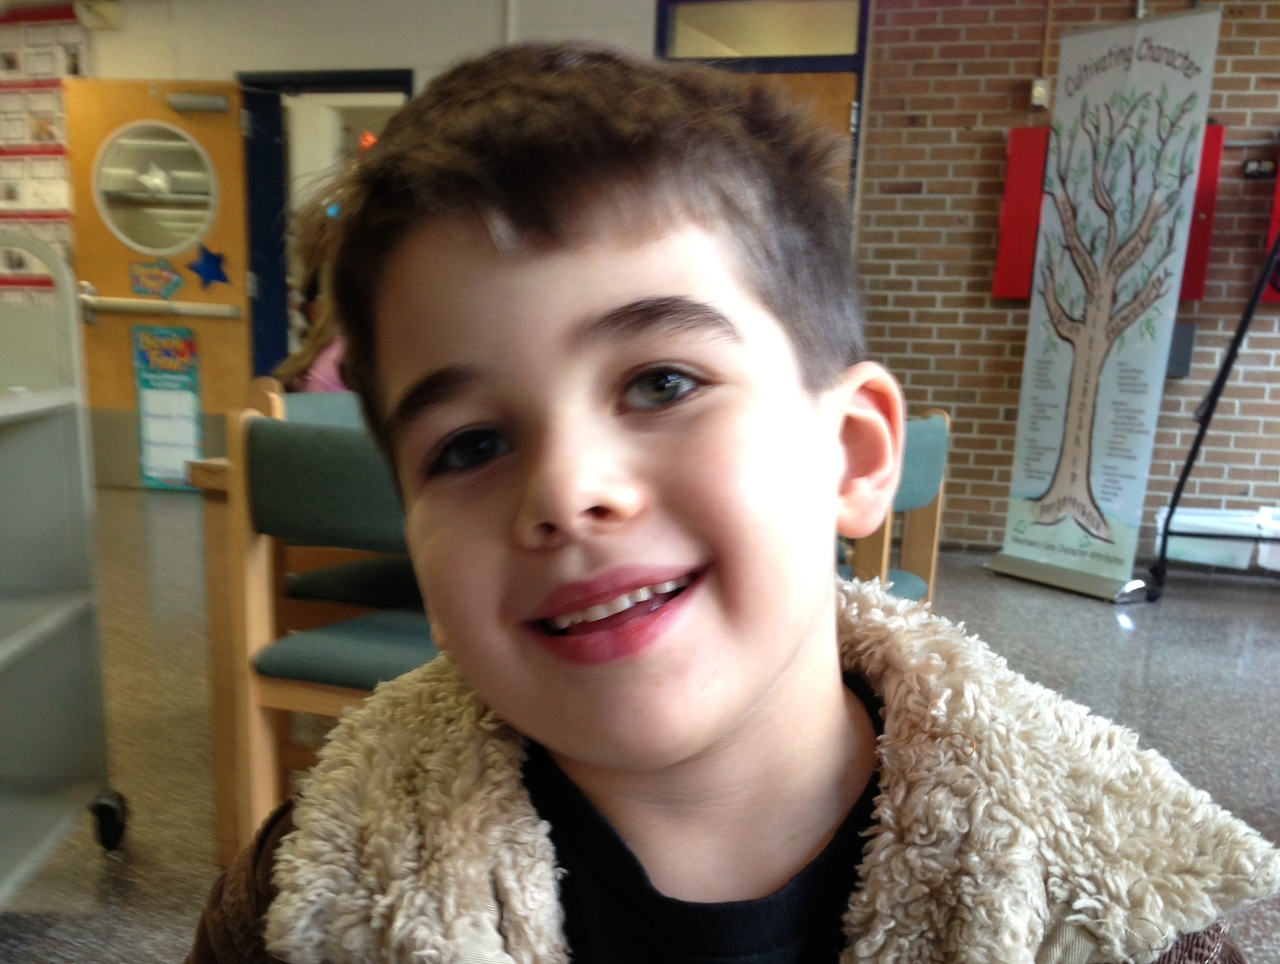 Noah Pozner, 6, was among the 20 child victims of the Dec. 14, 2012 shooting massacre at the Sandy Hook Elementary School in Newtown, Conn., that also claimed six adults. (Courtesy Pozner family, via Forward)